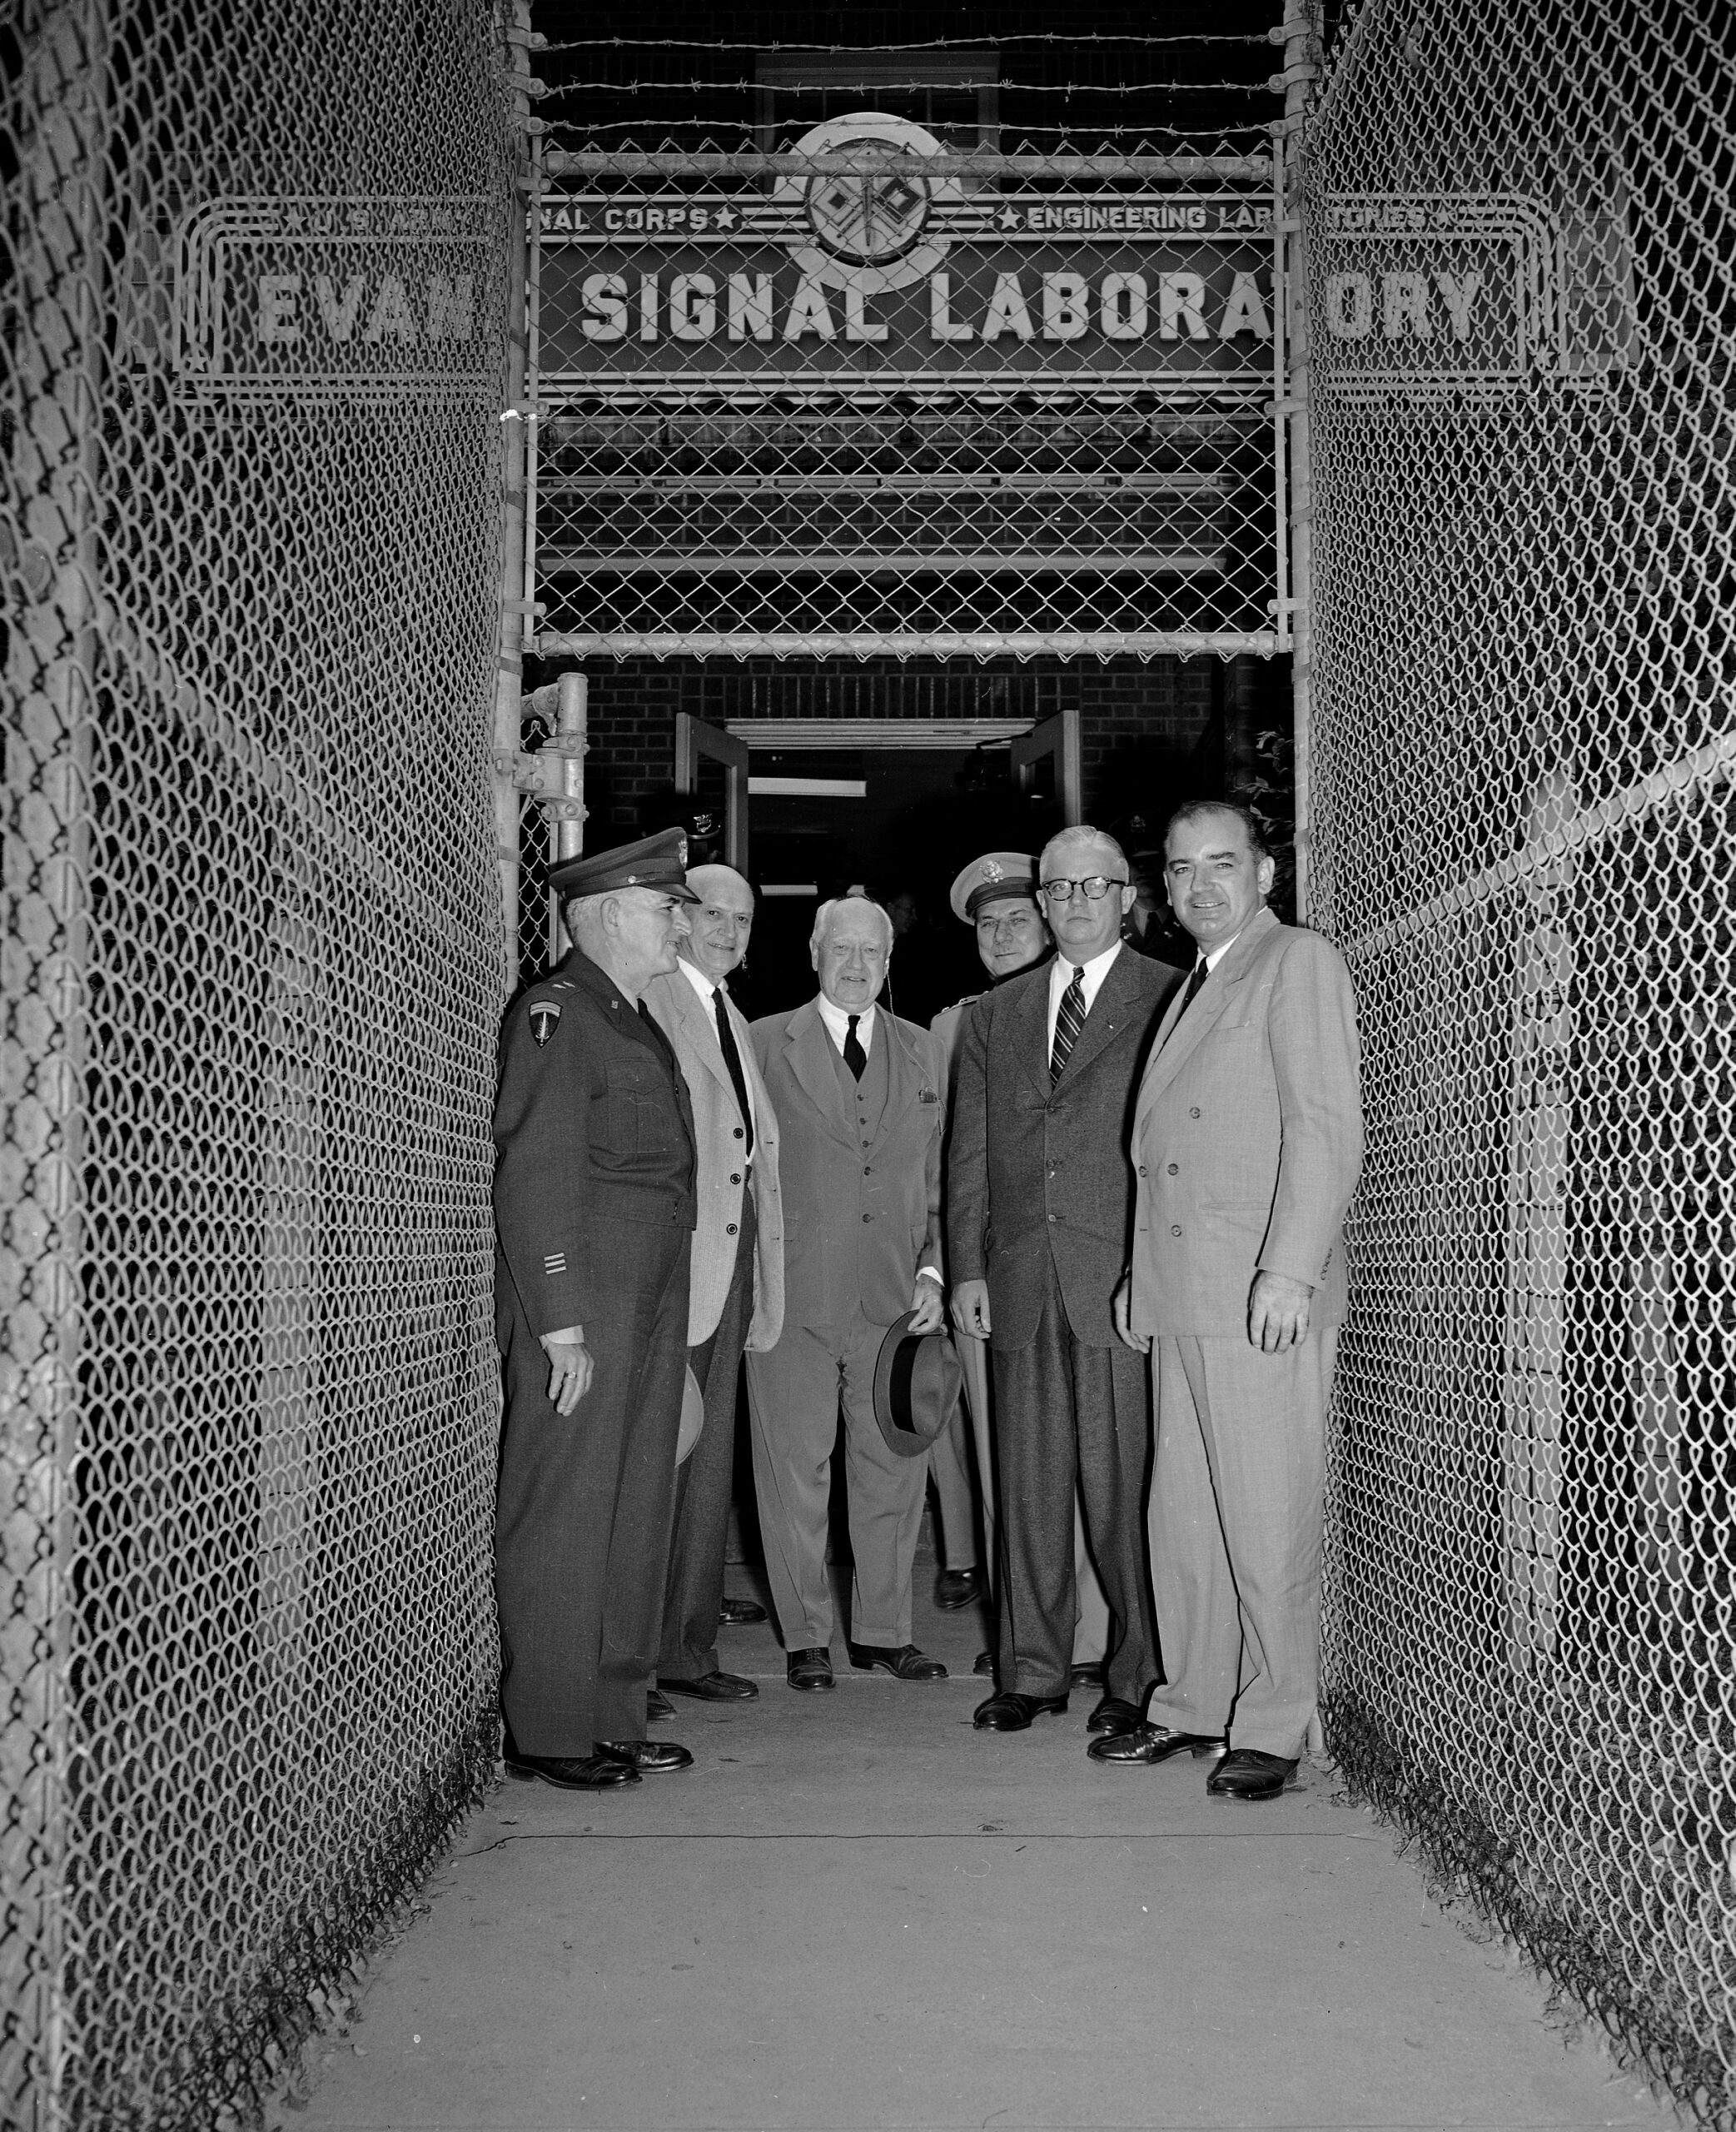 Sen. Joe McCarthy, right, Secretary of Army Robert T. Stevens, second from right, and New Jersey congressmen leave the Evans Signal Laboratory at Fort Monmouth, N.J., Oct. 20, 1953, where they had been investigating possible security leaks at the Army Signal Corps Radar Laboratories.  At the gate are, left to right: Maj. Gen. Kirke B. Lawton; Sen. H. Alexander Smith (R-N.J.); Rep. James C. Auchincloss (R-N.J.); Maj. Gen. George I. Back, chief of the Army Signal Corps; Stevens and McCarthy.  McCarthy told newsmen he hopes to find new leads for purported spy ring operating  within the radar center.  (AP Photo)